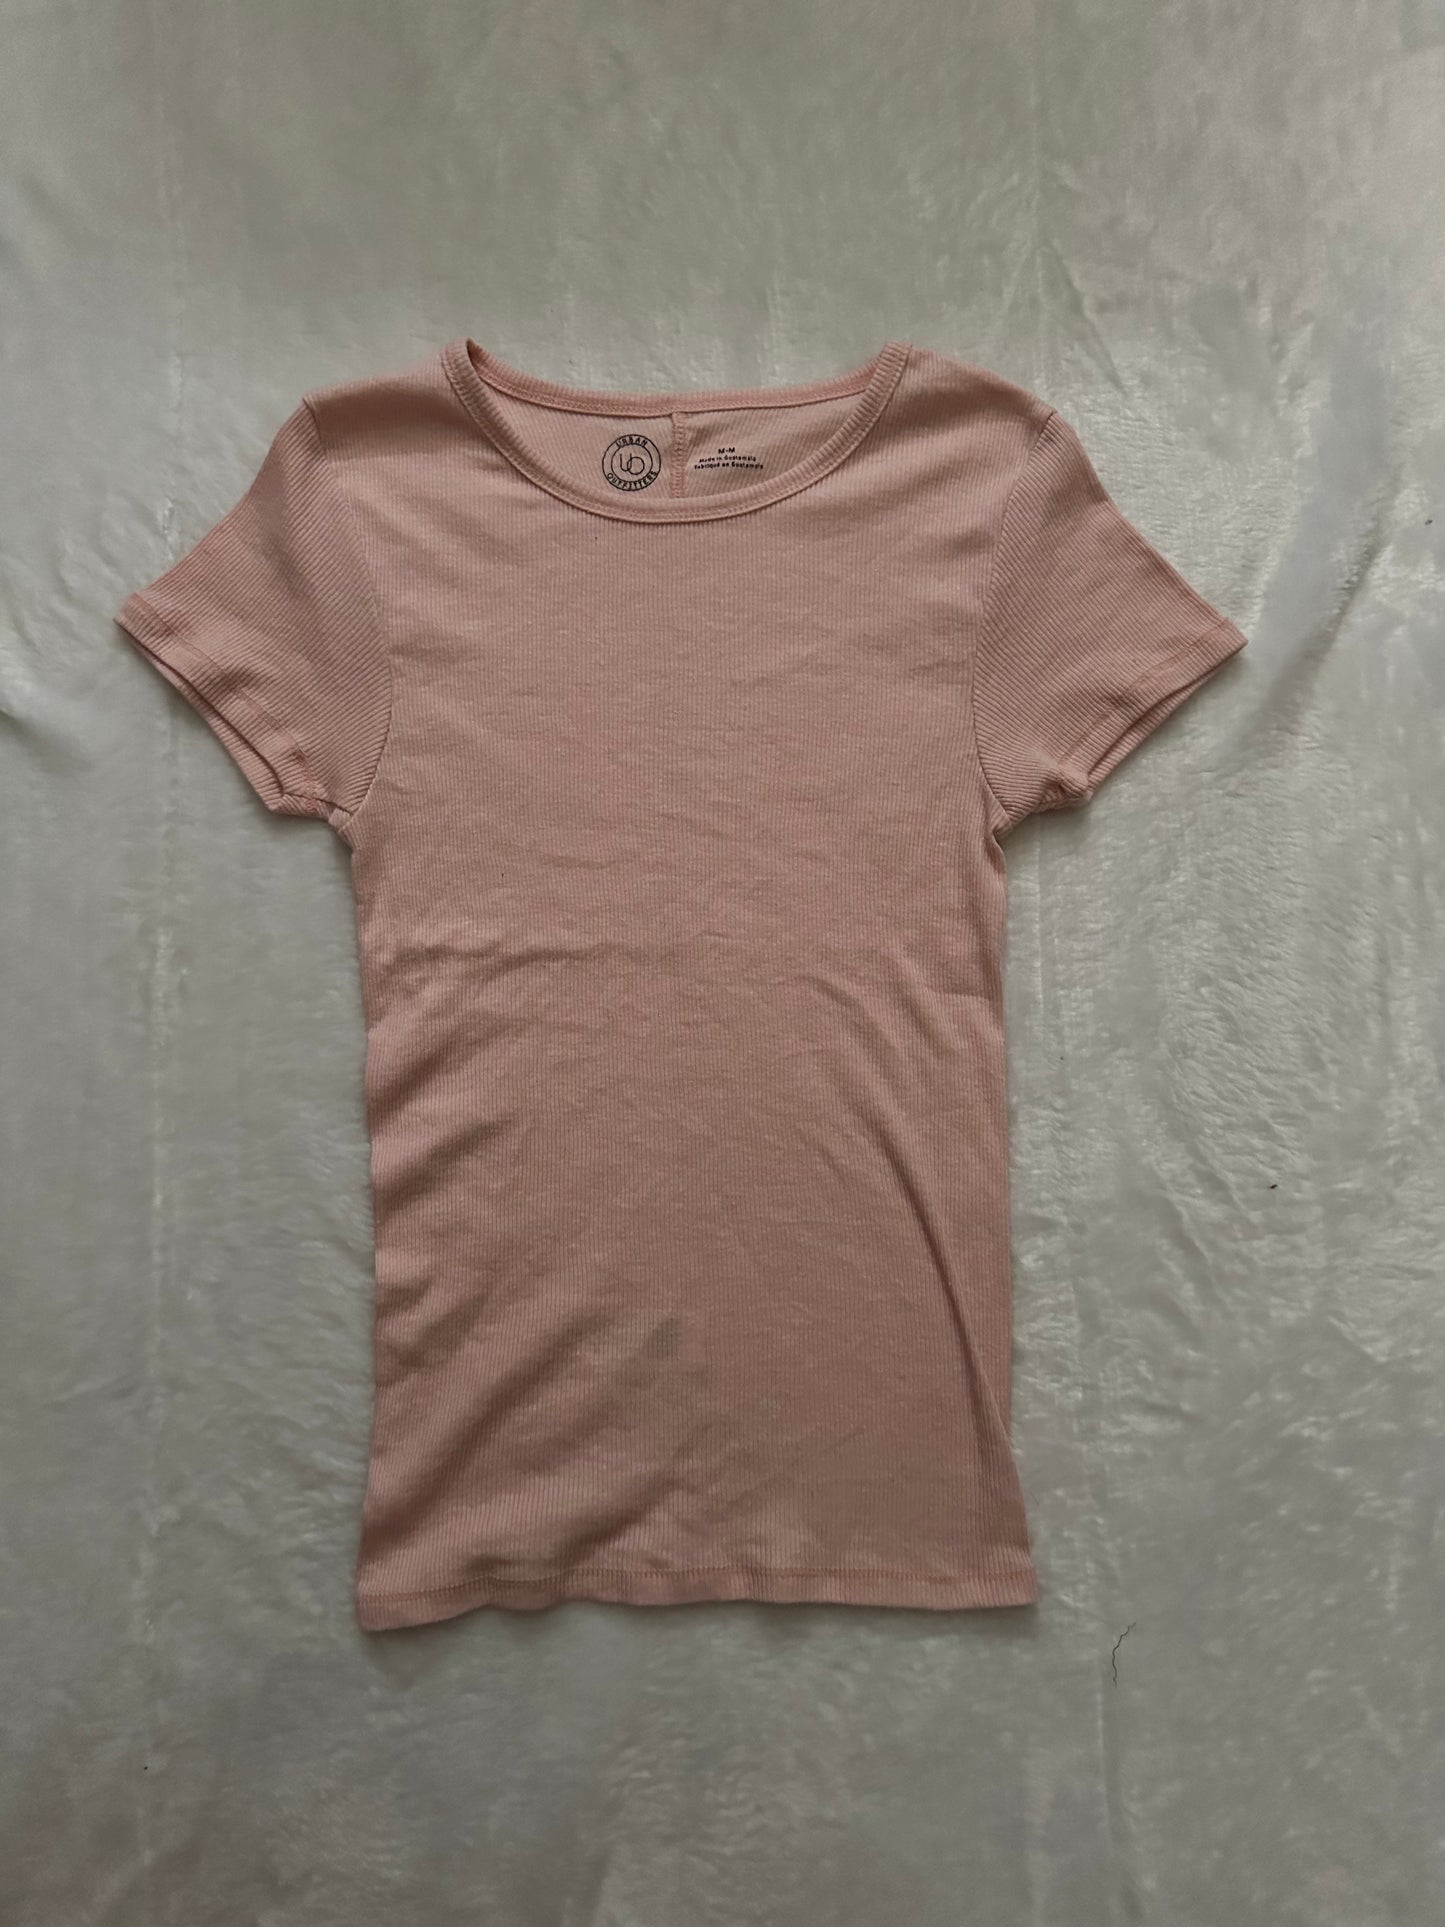 Urban Outfitters Short Sleeve Basic Top